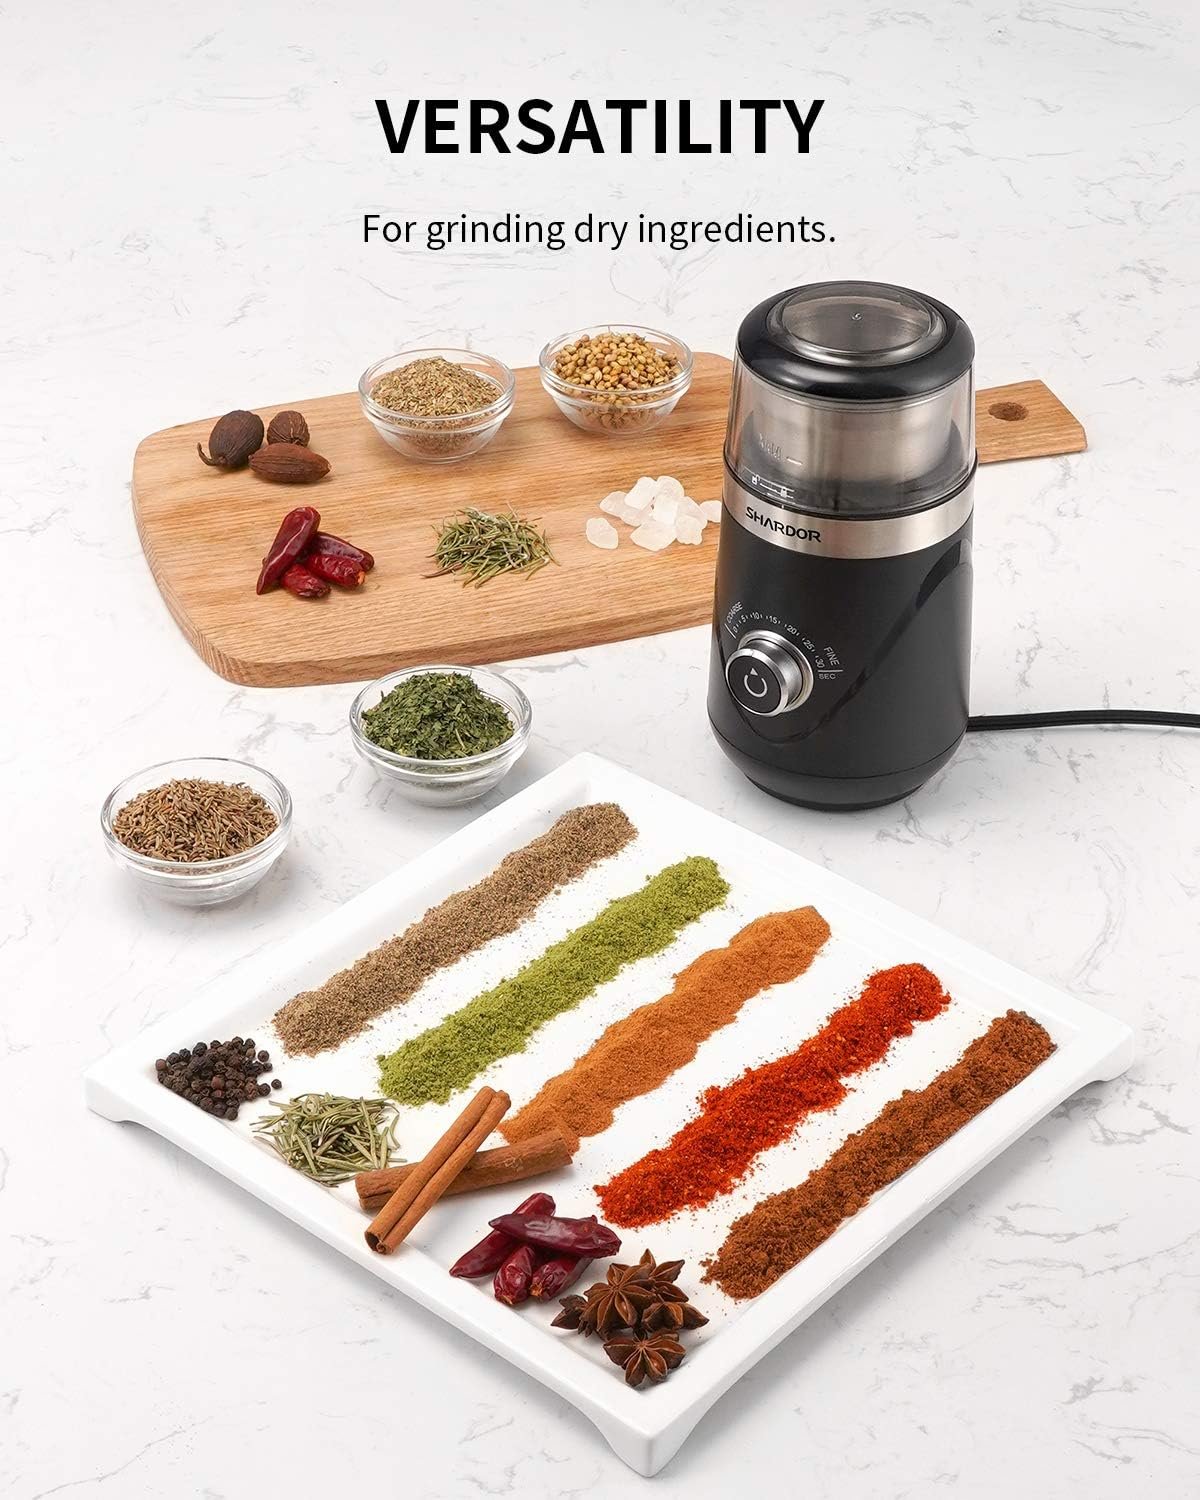 5 Electric Grinder with Adjustable Settings and Stainless Steel Bowl for Grinding Coffee, Spices, and Nuts, in Black